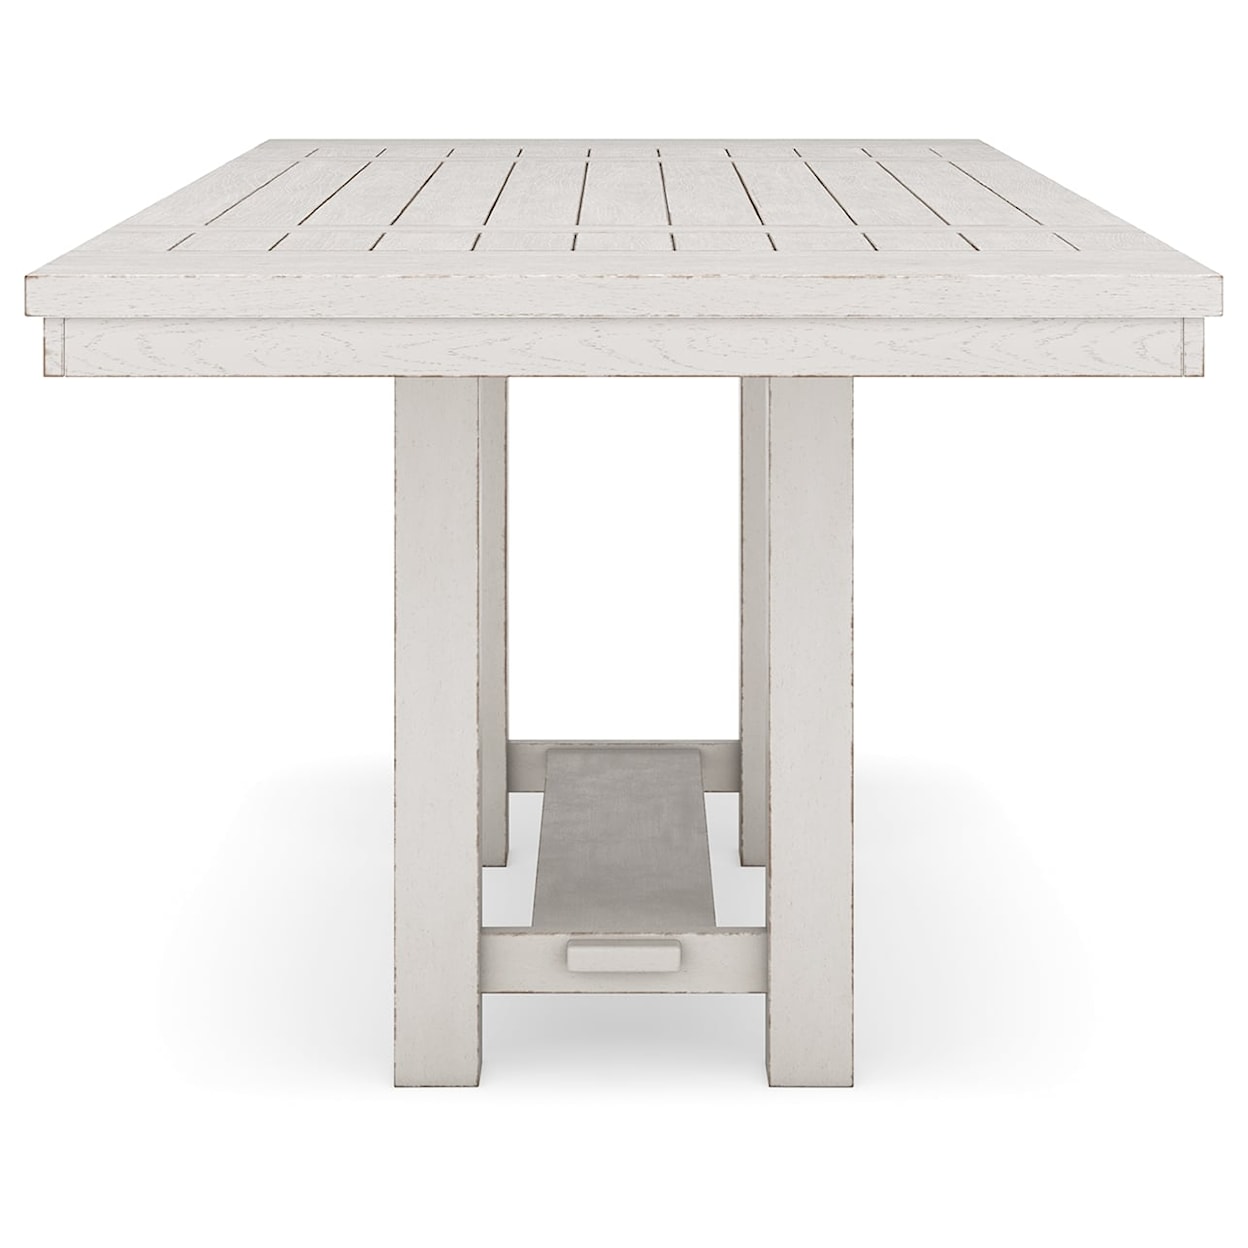 Benchcraft Robbinsdale Counter Height Dining Extension Table